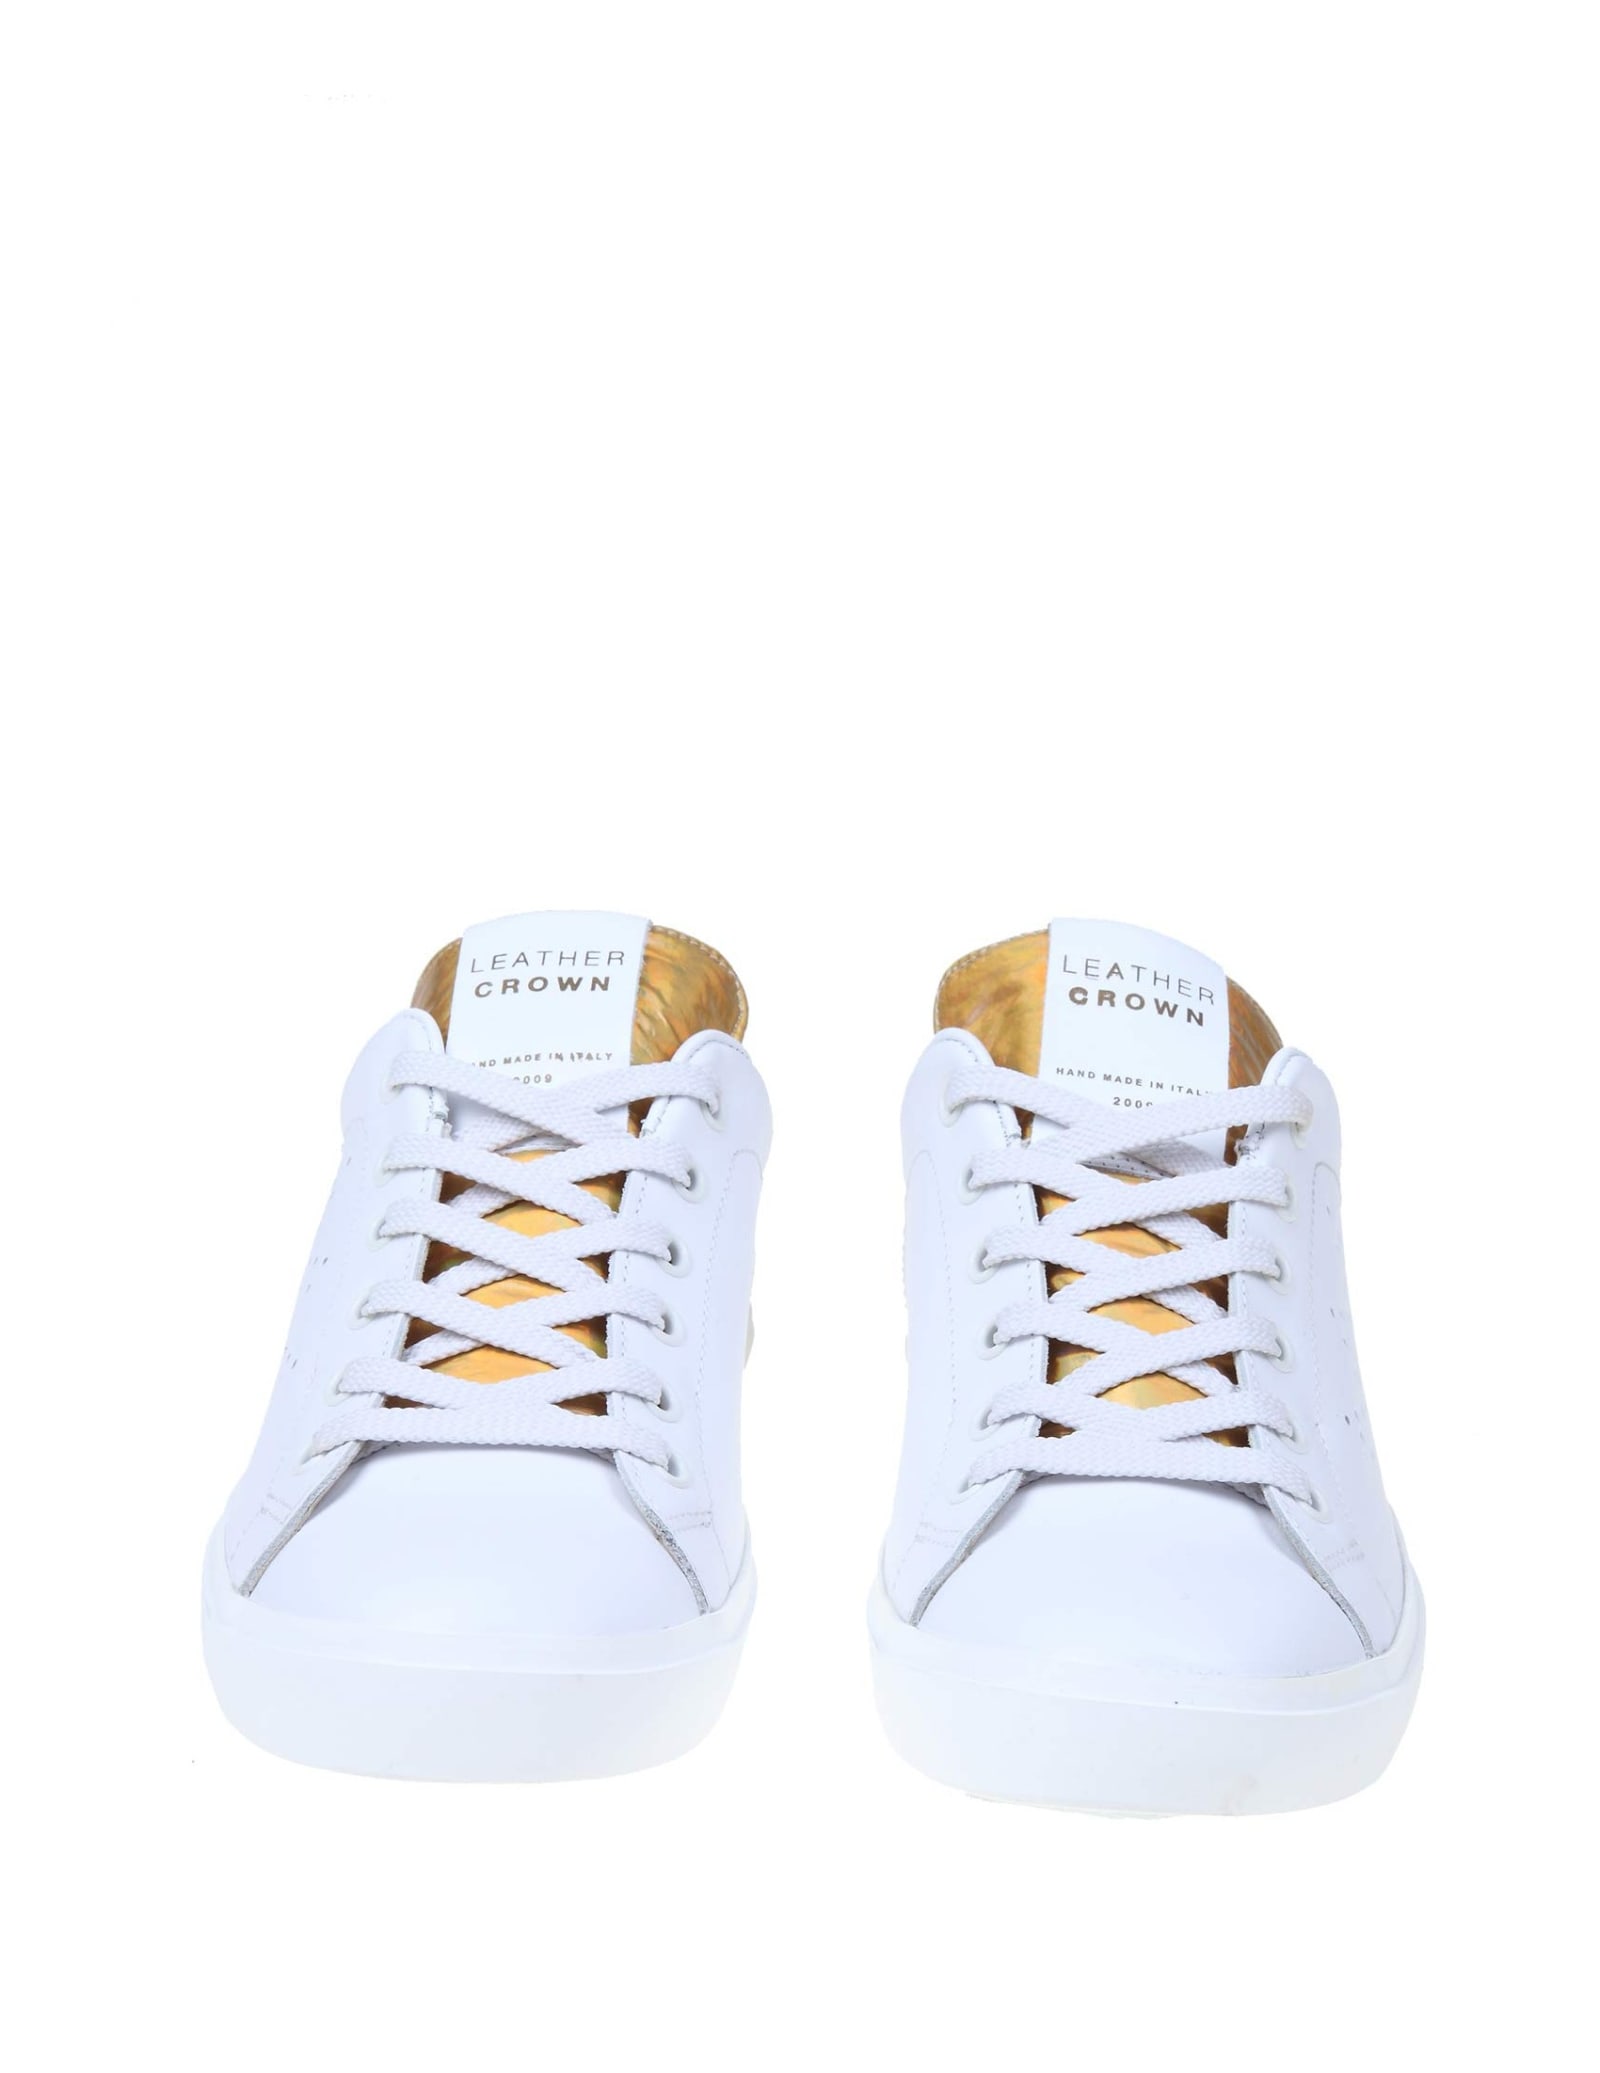 leather crown sneakers sale